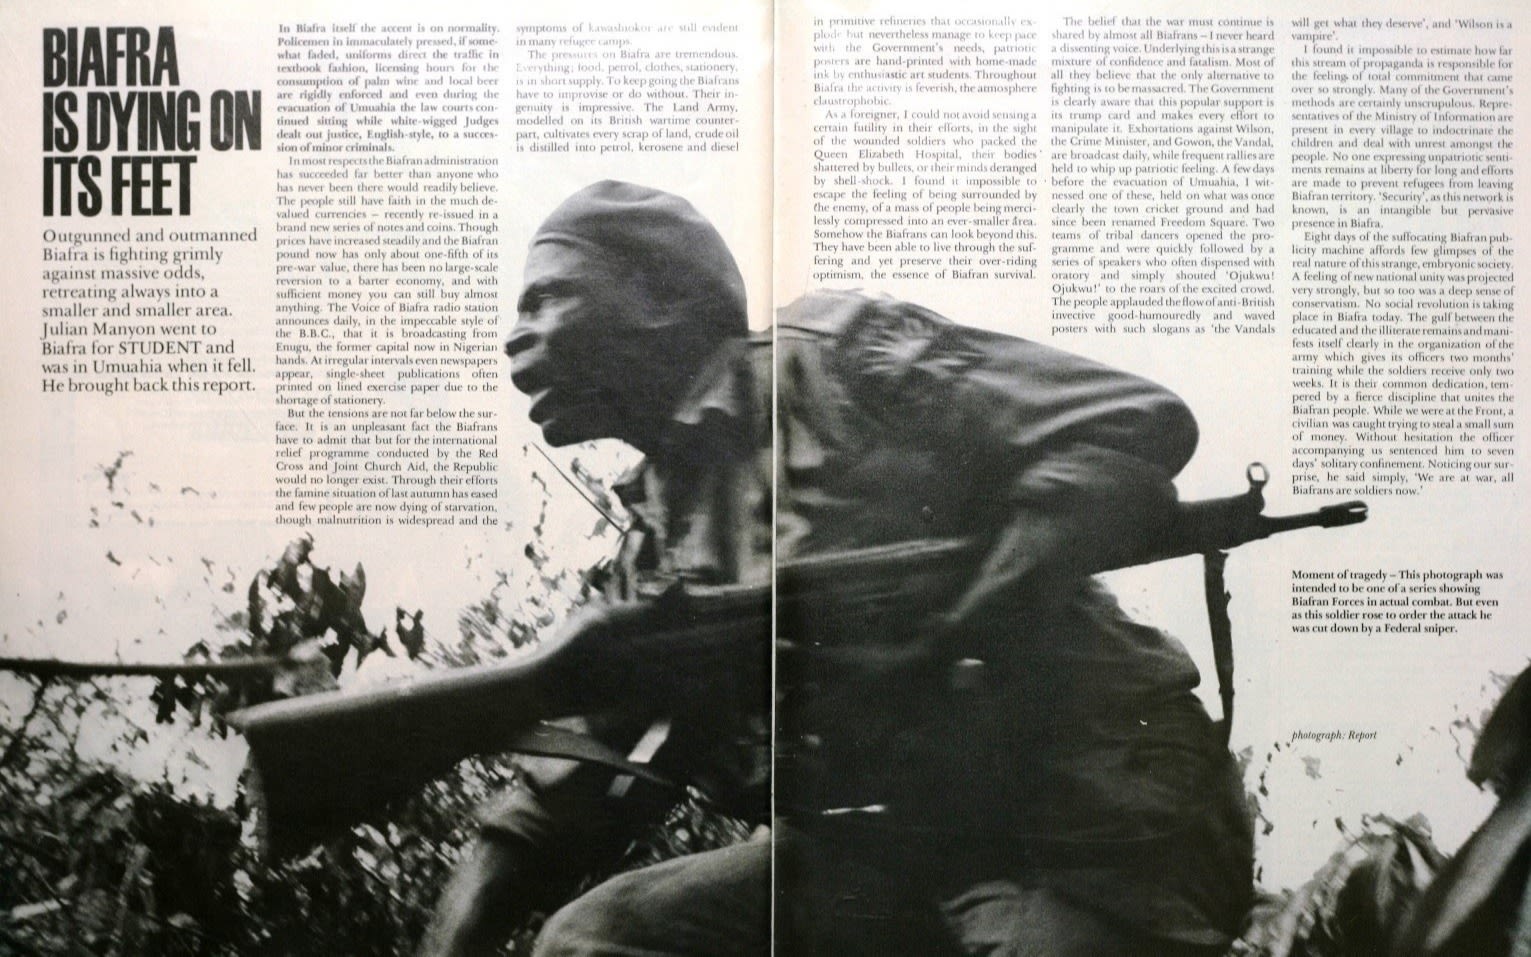 An article from Student magazine titled Biafra is dying on its feet